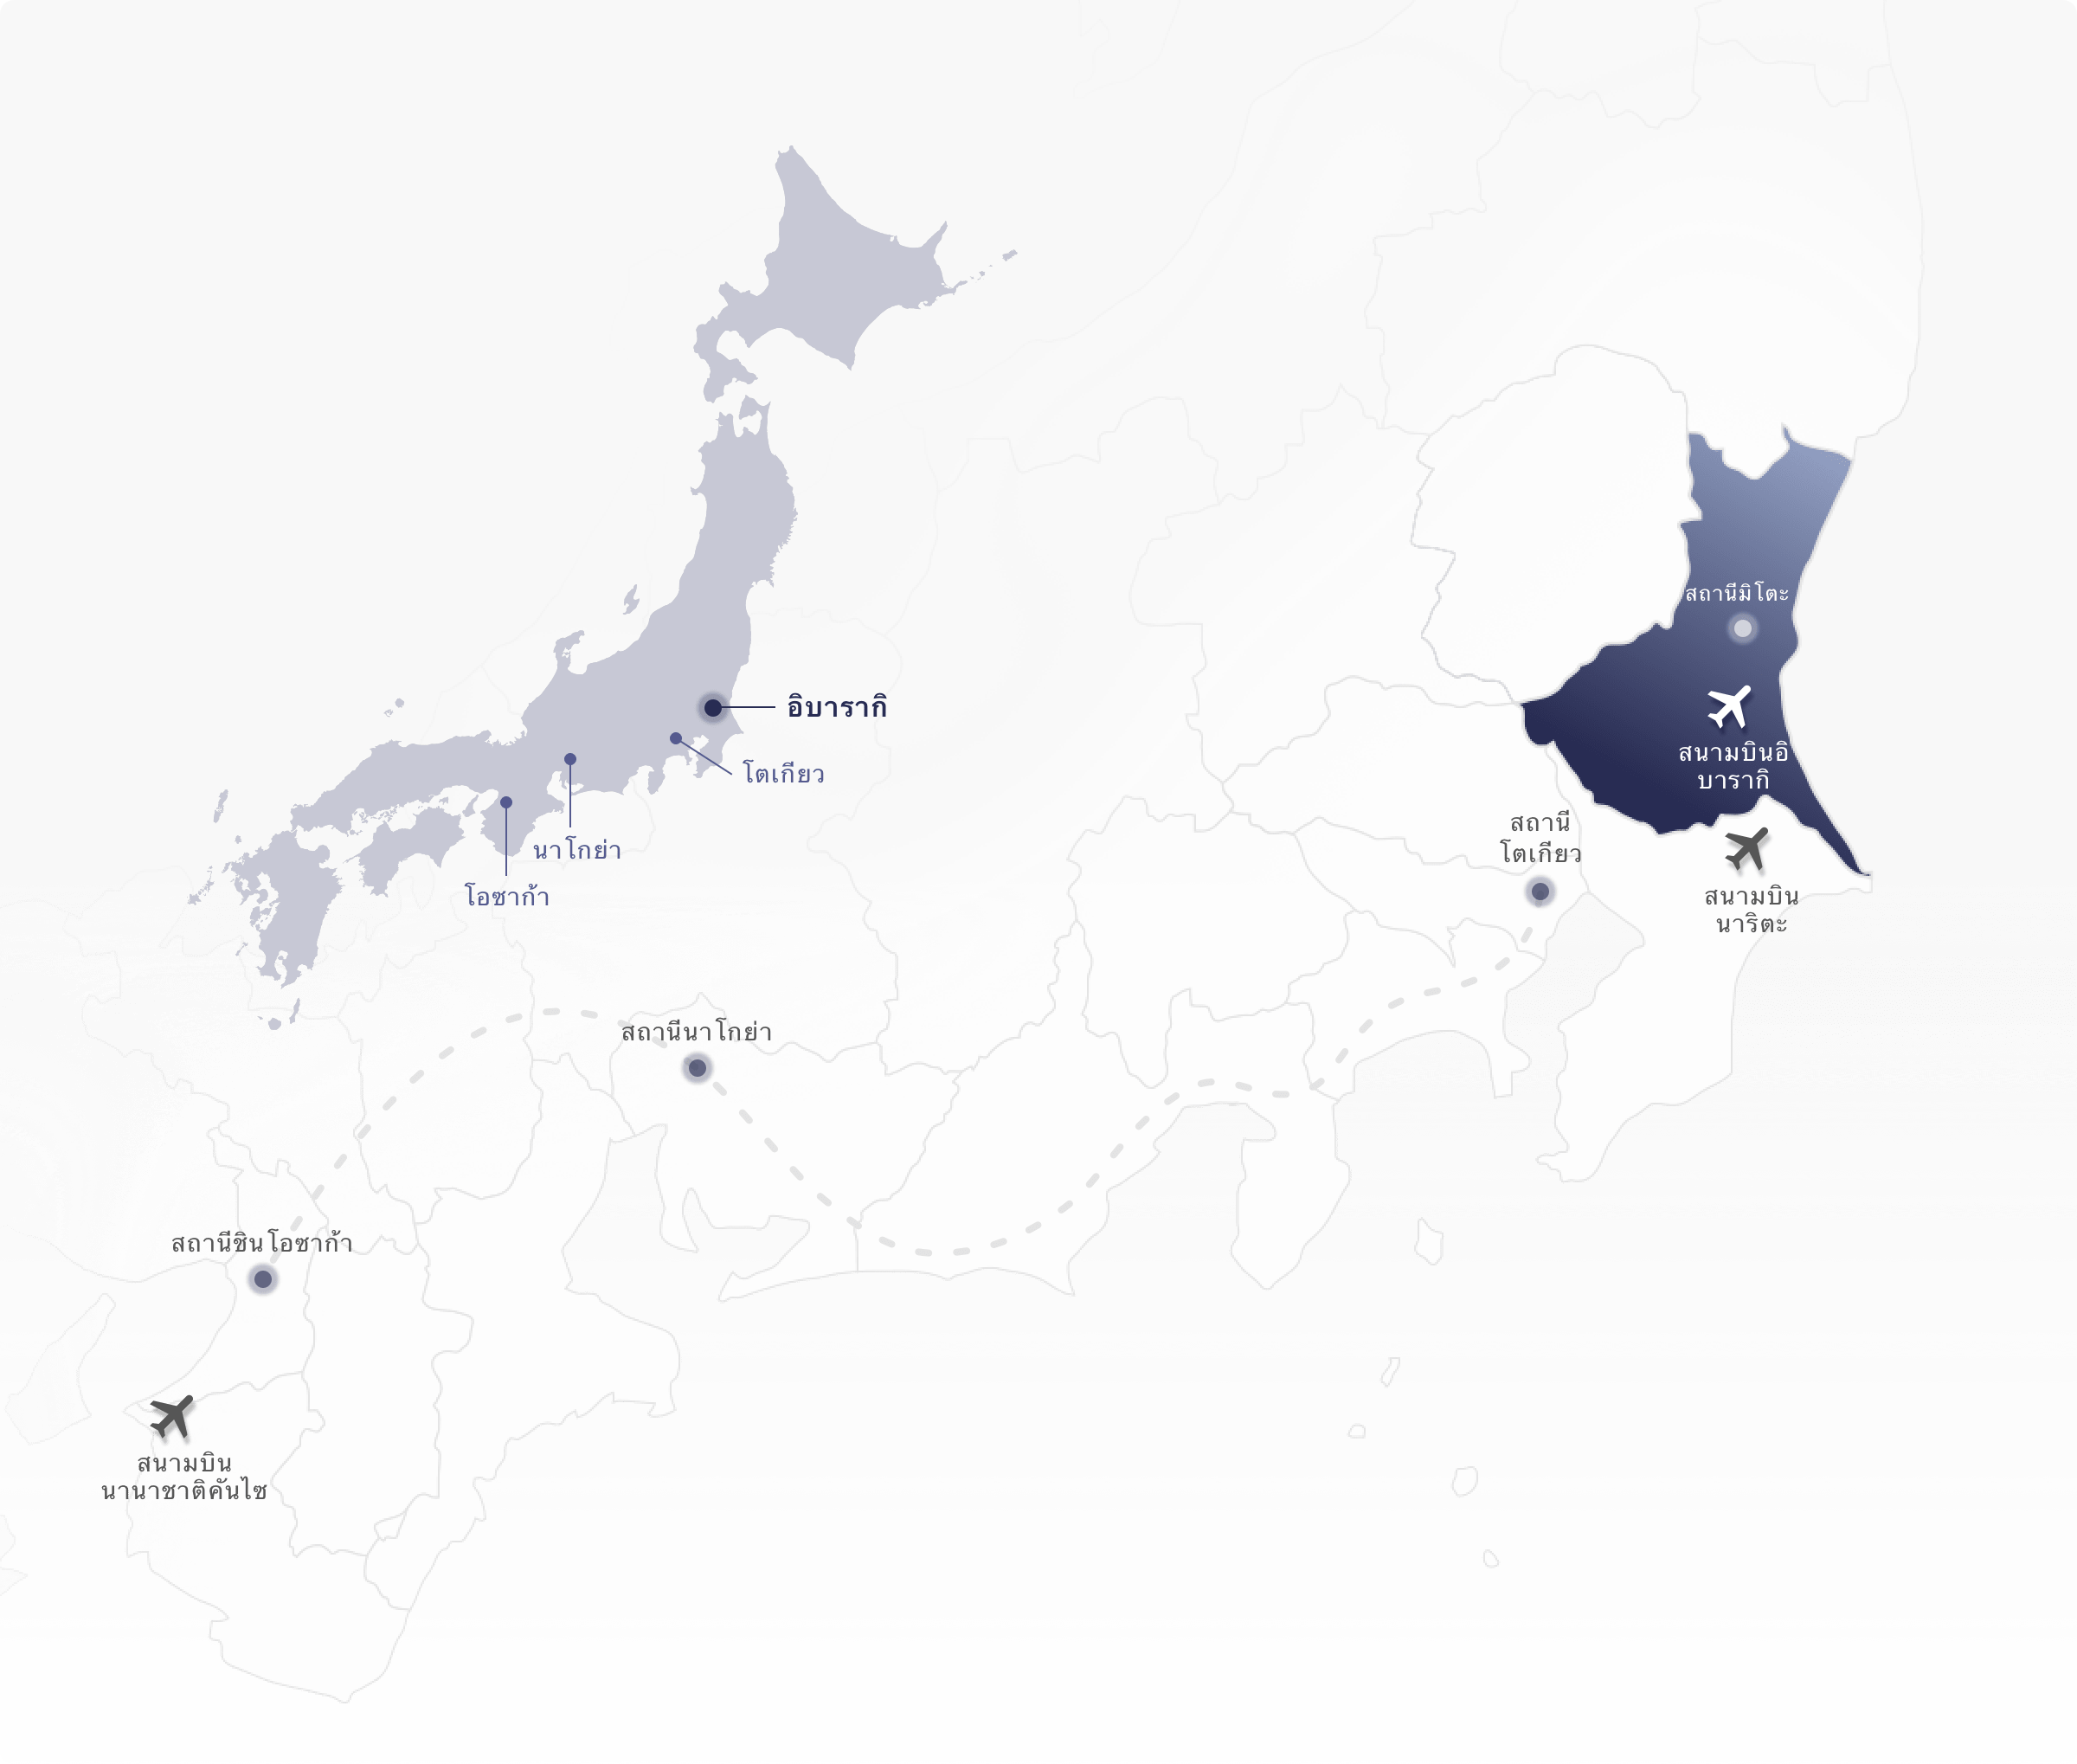 map of Japan and map of Ibaraki prefecture